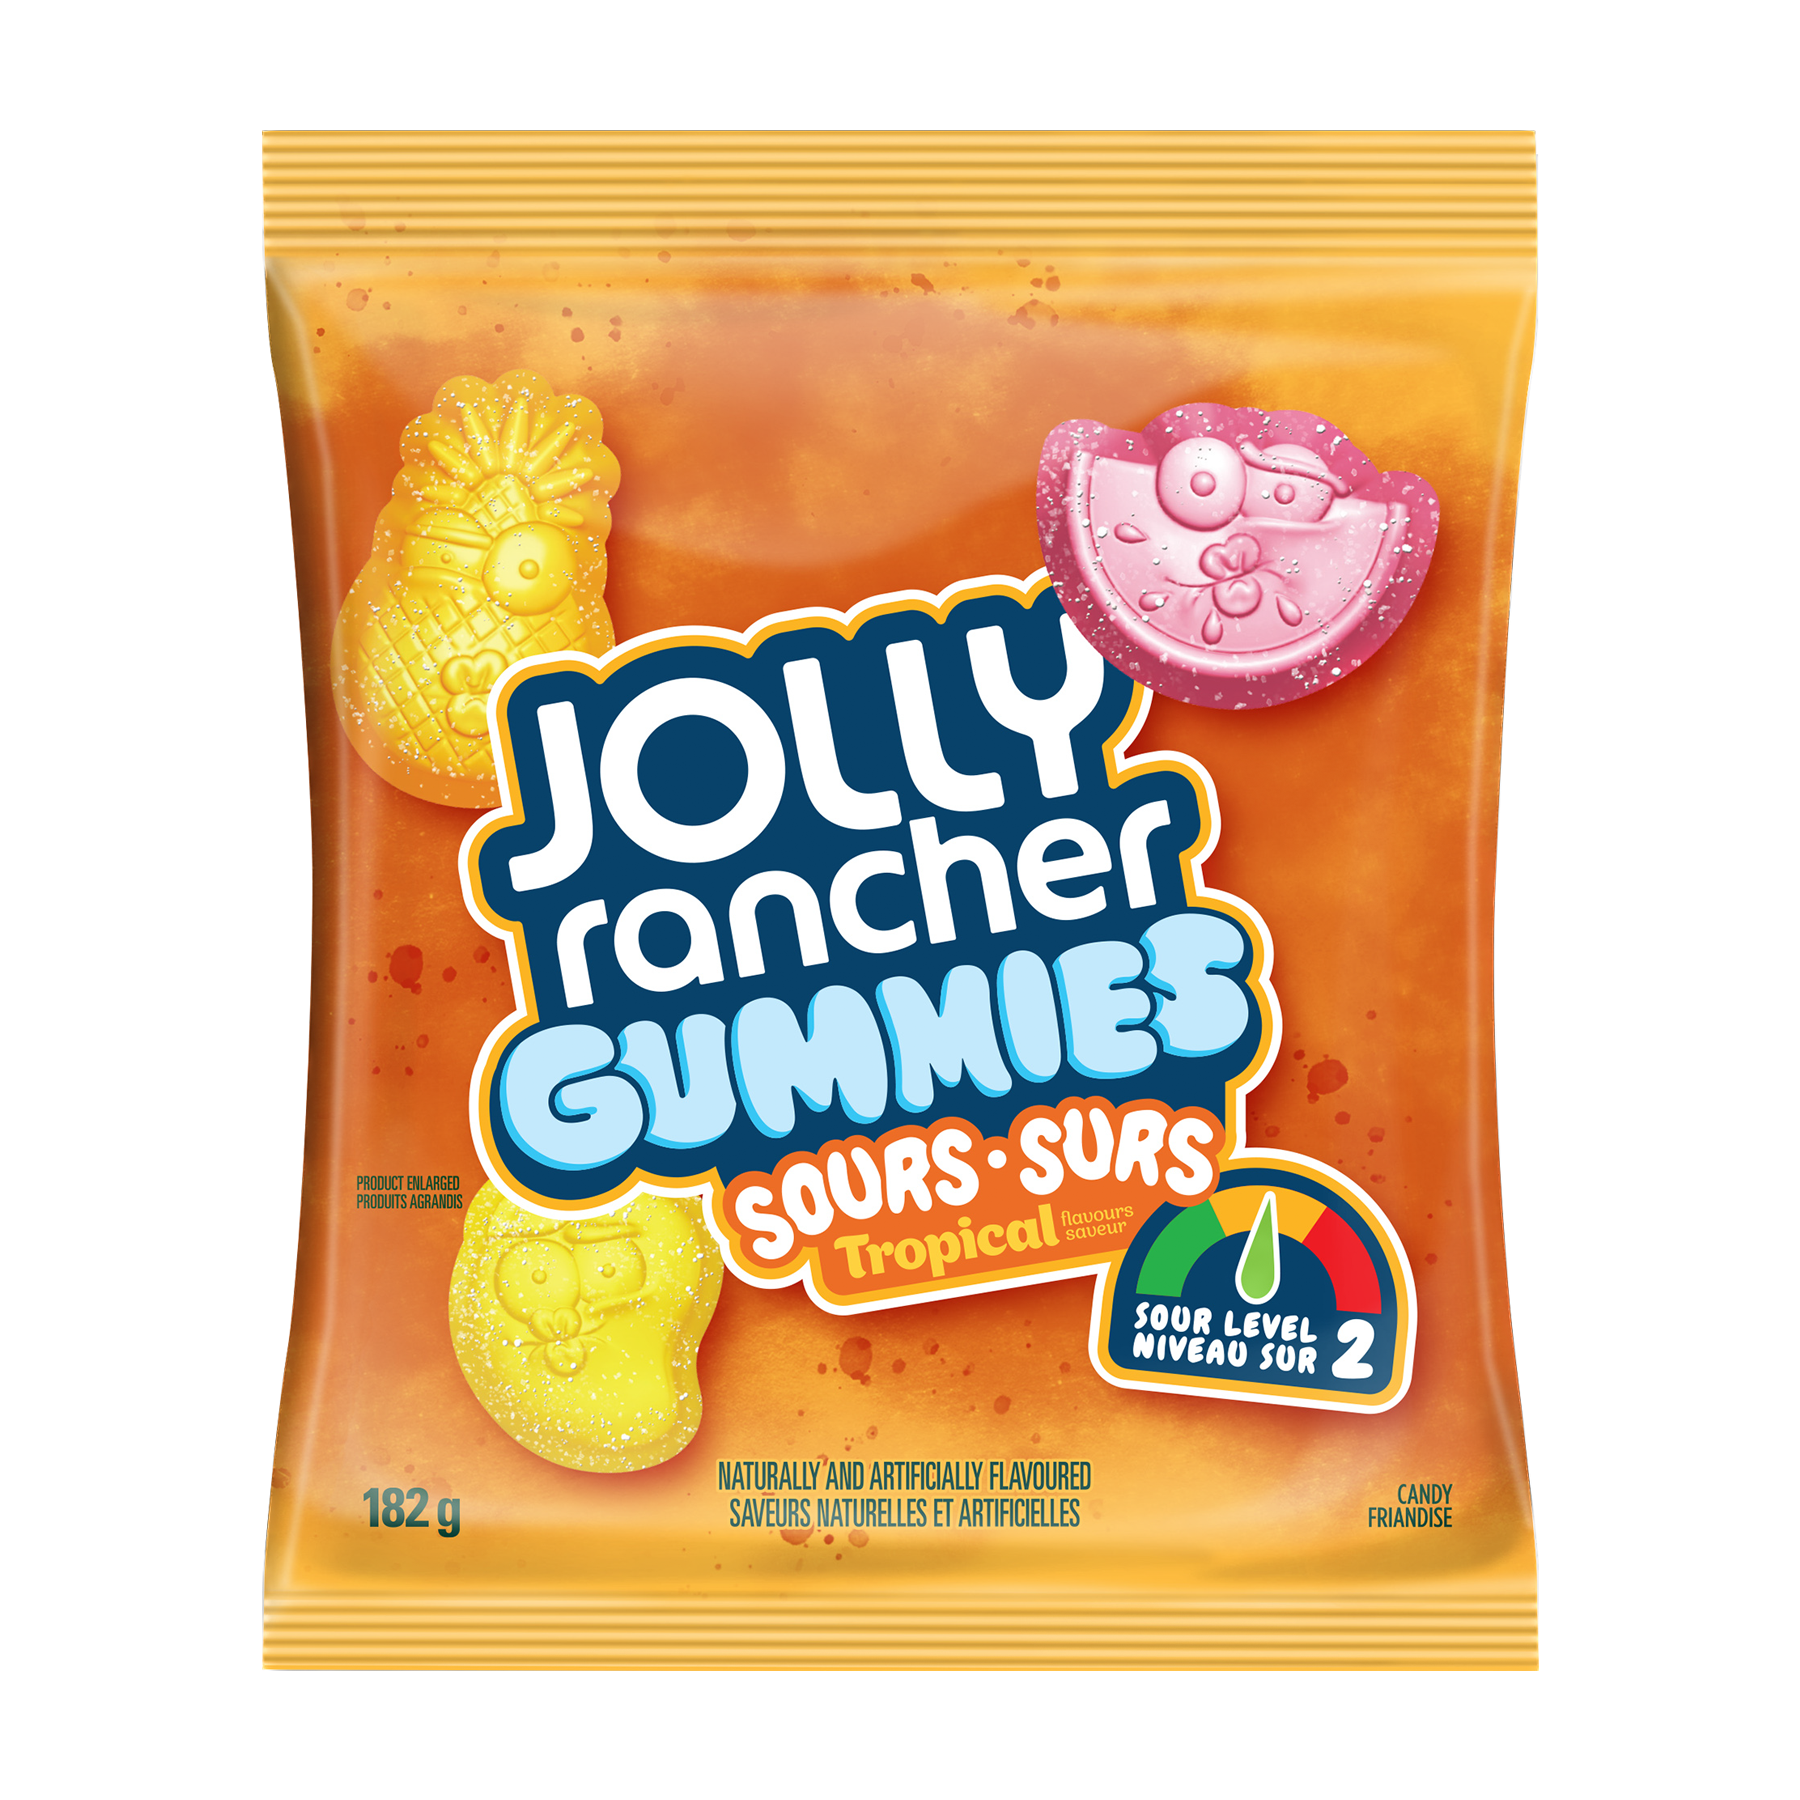 Jolly Rancher Gummies Sours Tropical Flavored Candy (182G)